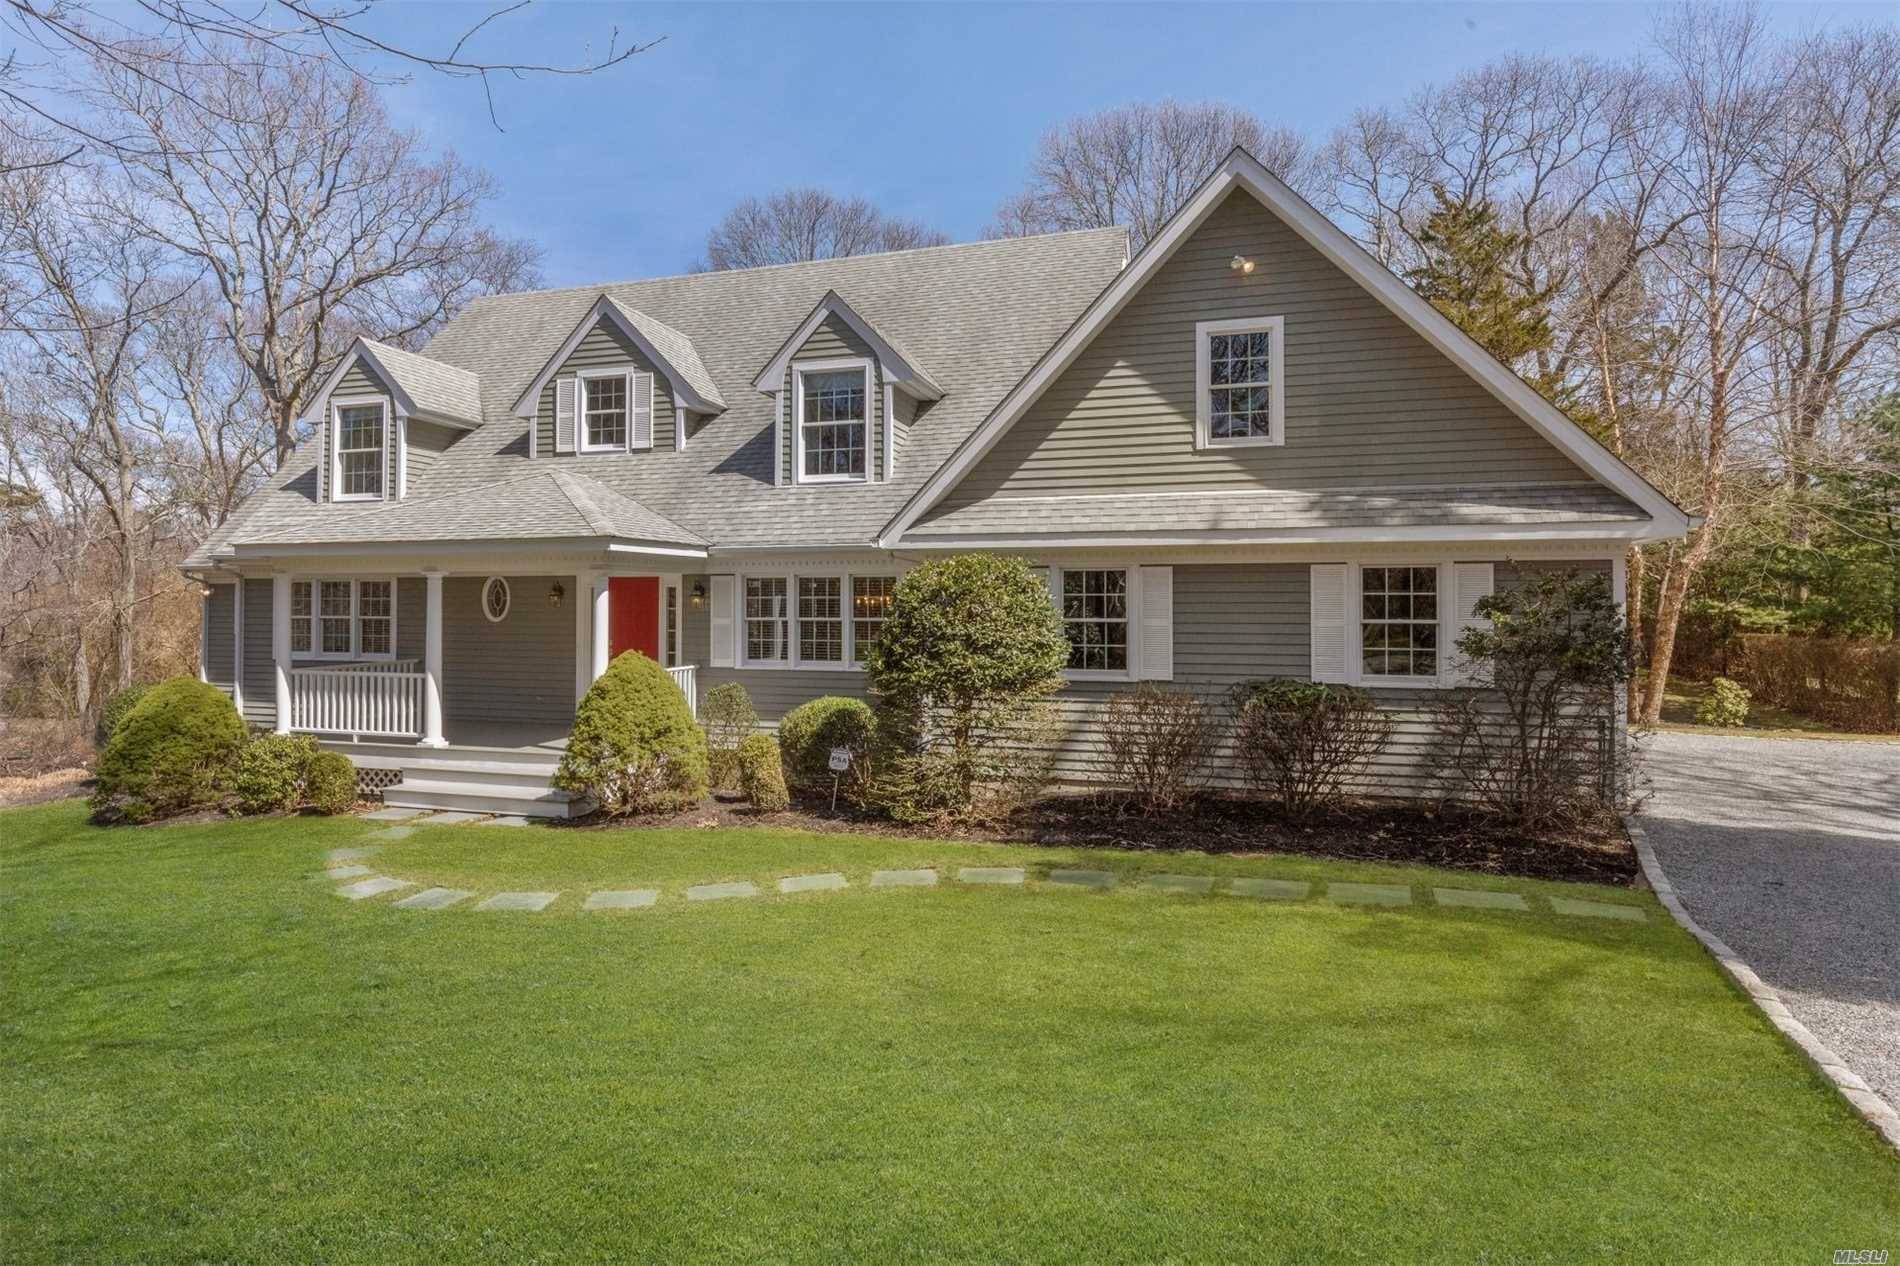 A Stylish four bedroom, two and one half bath, large Cape set in a tranquil waterfront community on almost an acre of Land in the Noyack area of Sag Harbor.